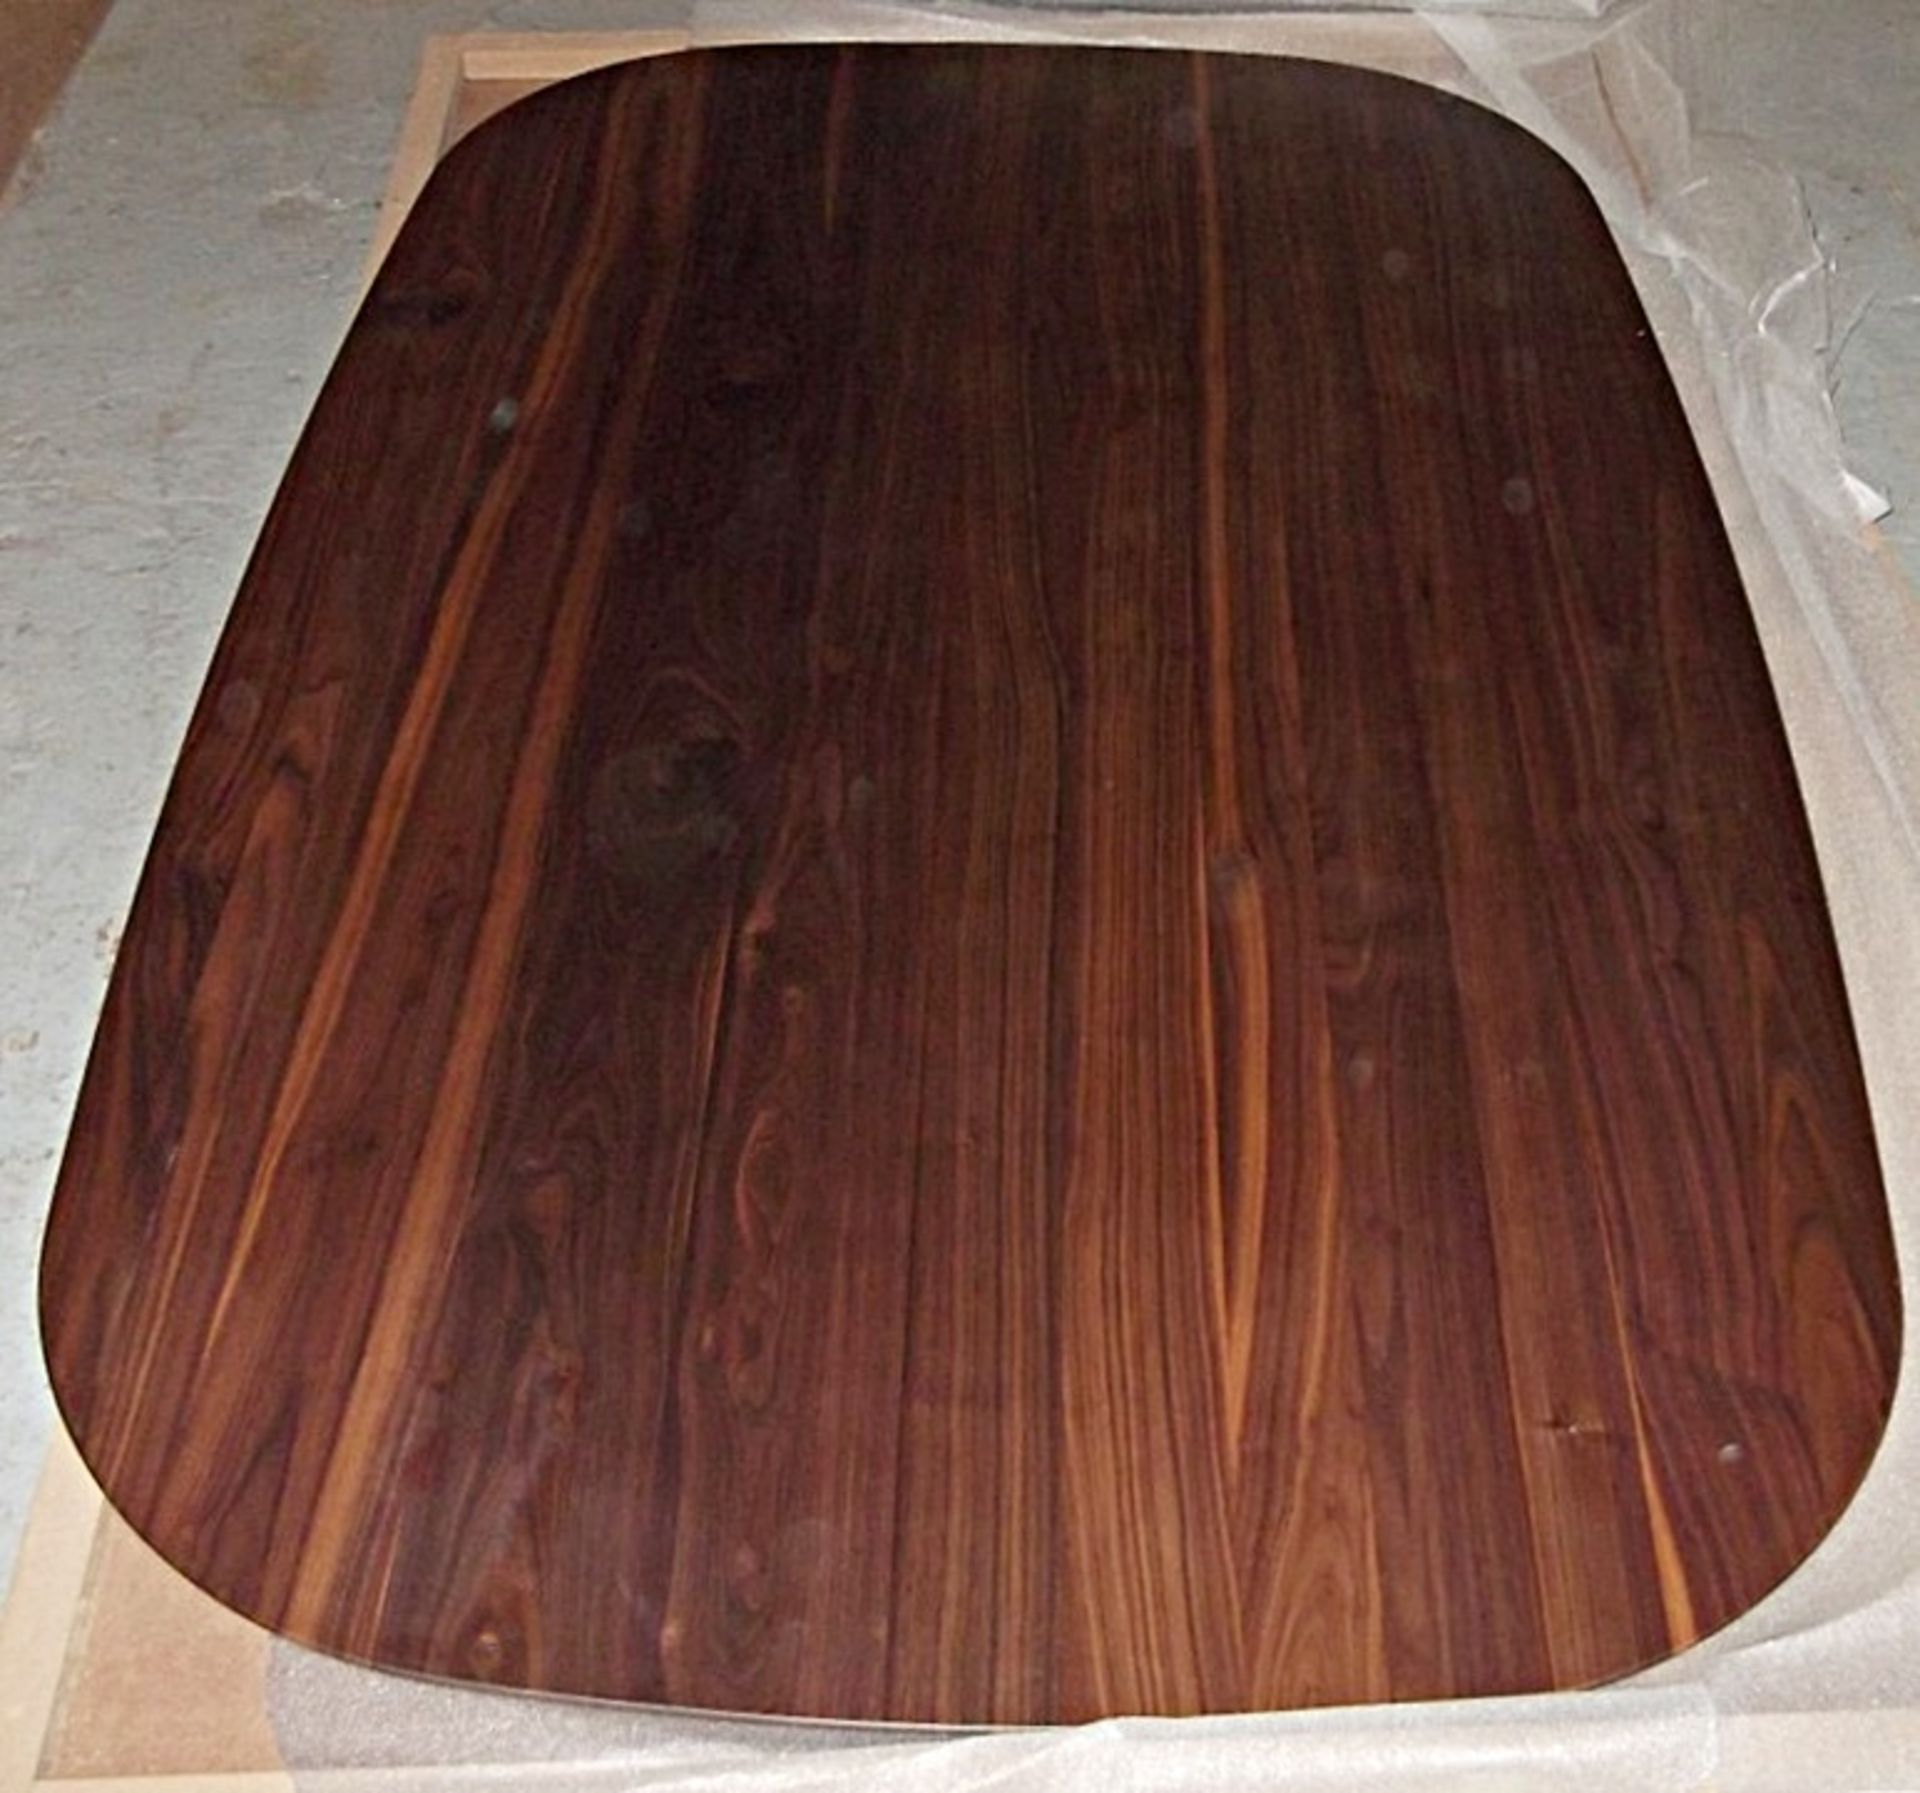 1 x PORADA Infinity (Oval Wooden Table Top Only) - Dimensions (Approx): 240 x 120cm - Solid